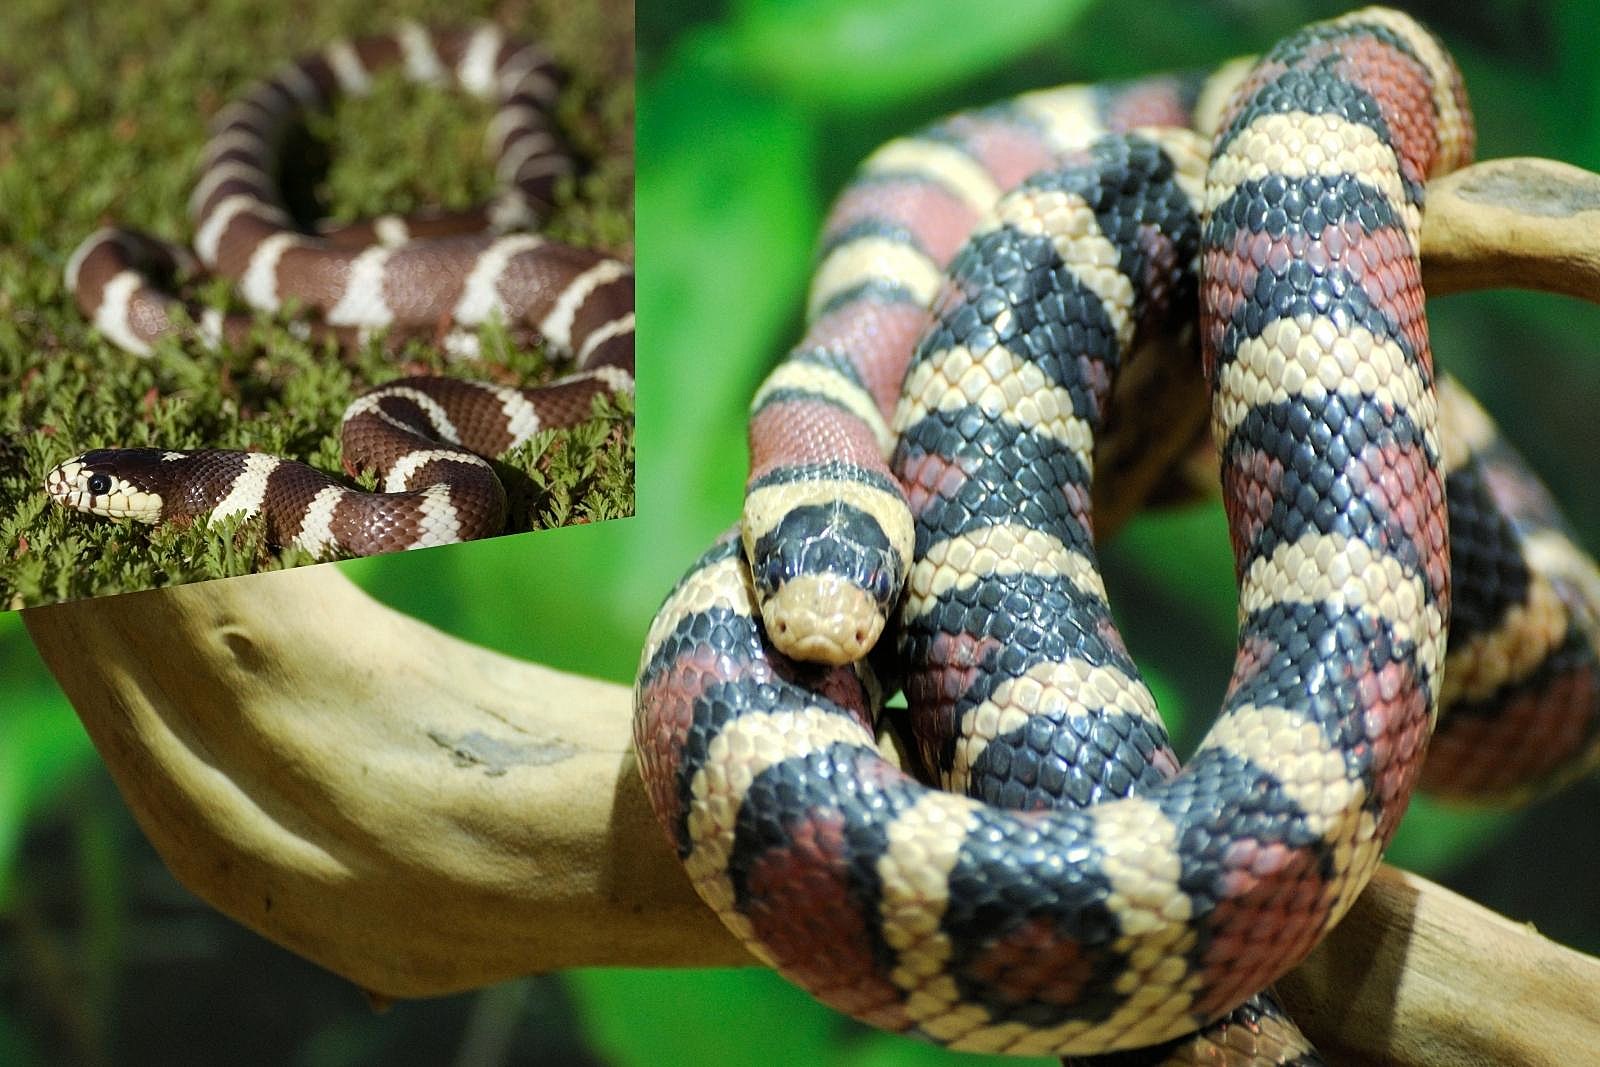 A California Mountain Kingsnake on a branch, with an inset close up.